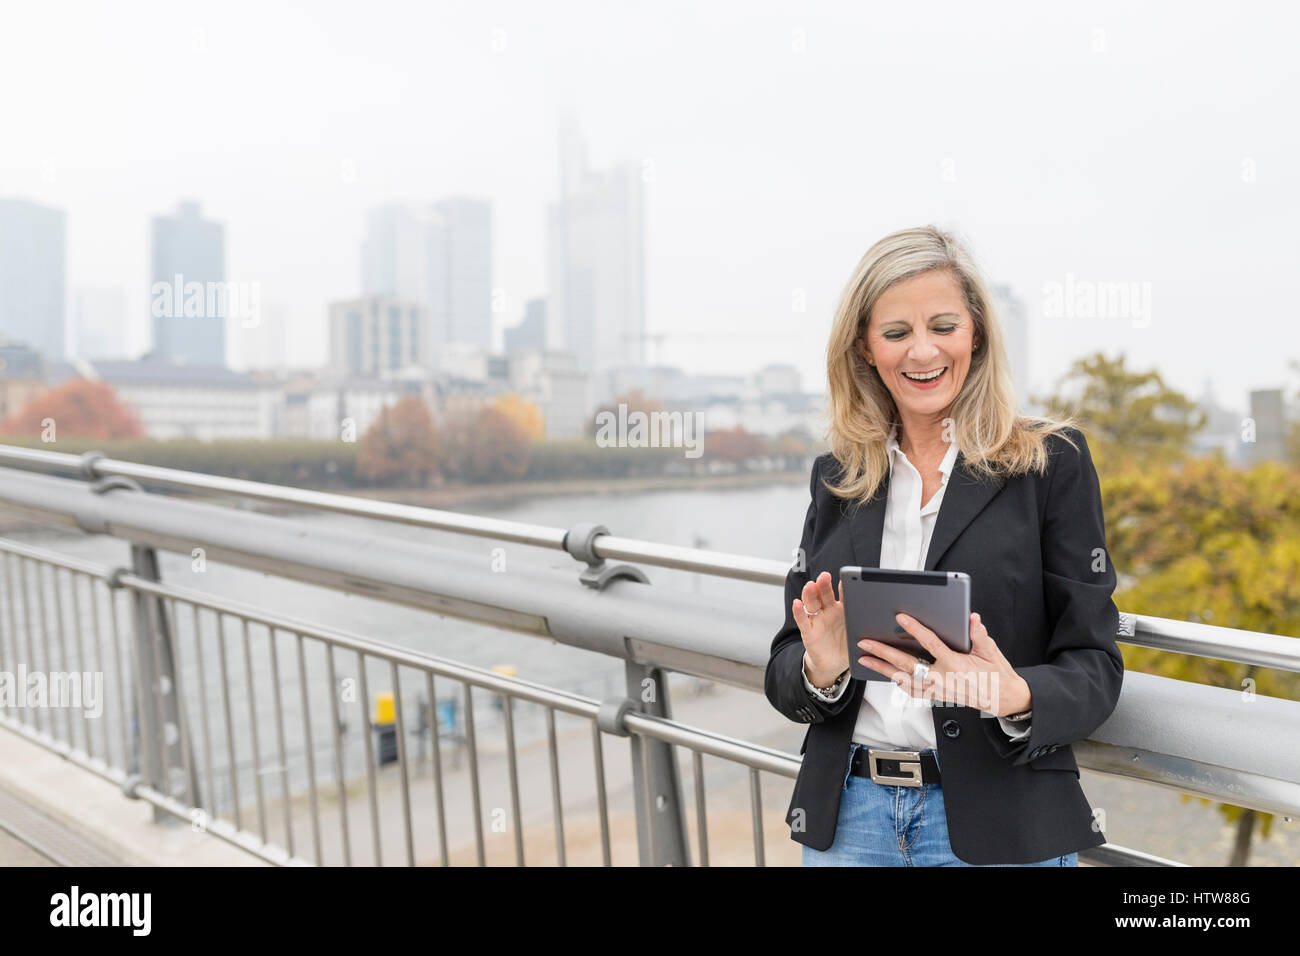 Businesswoman with tablet on a bridge Stock Photo